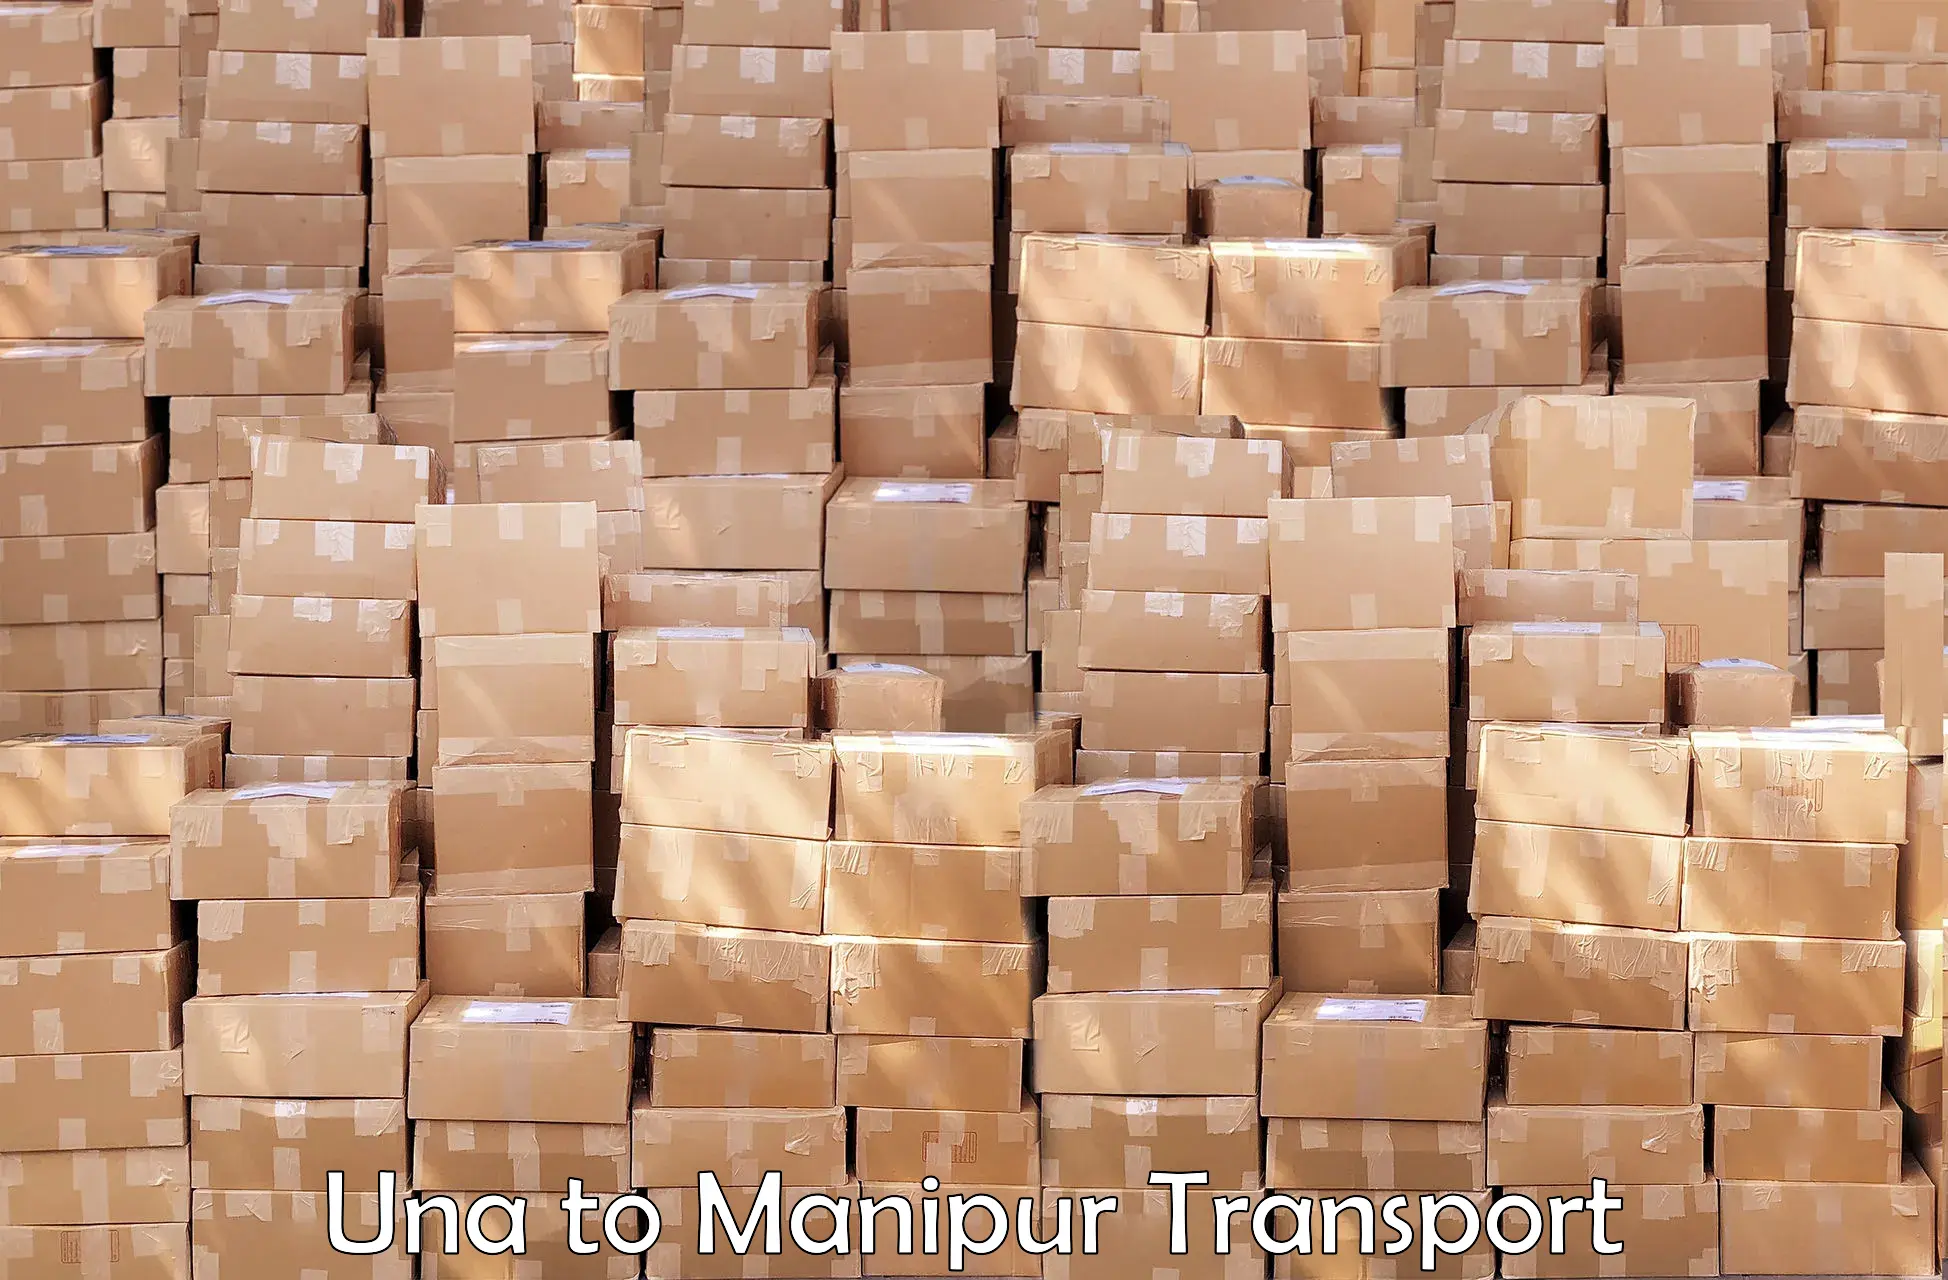 Transport bike from one state to another Una to Manipur